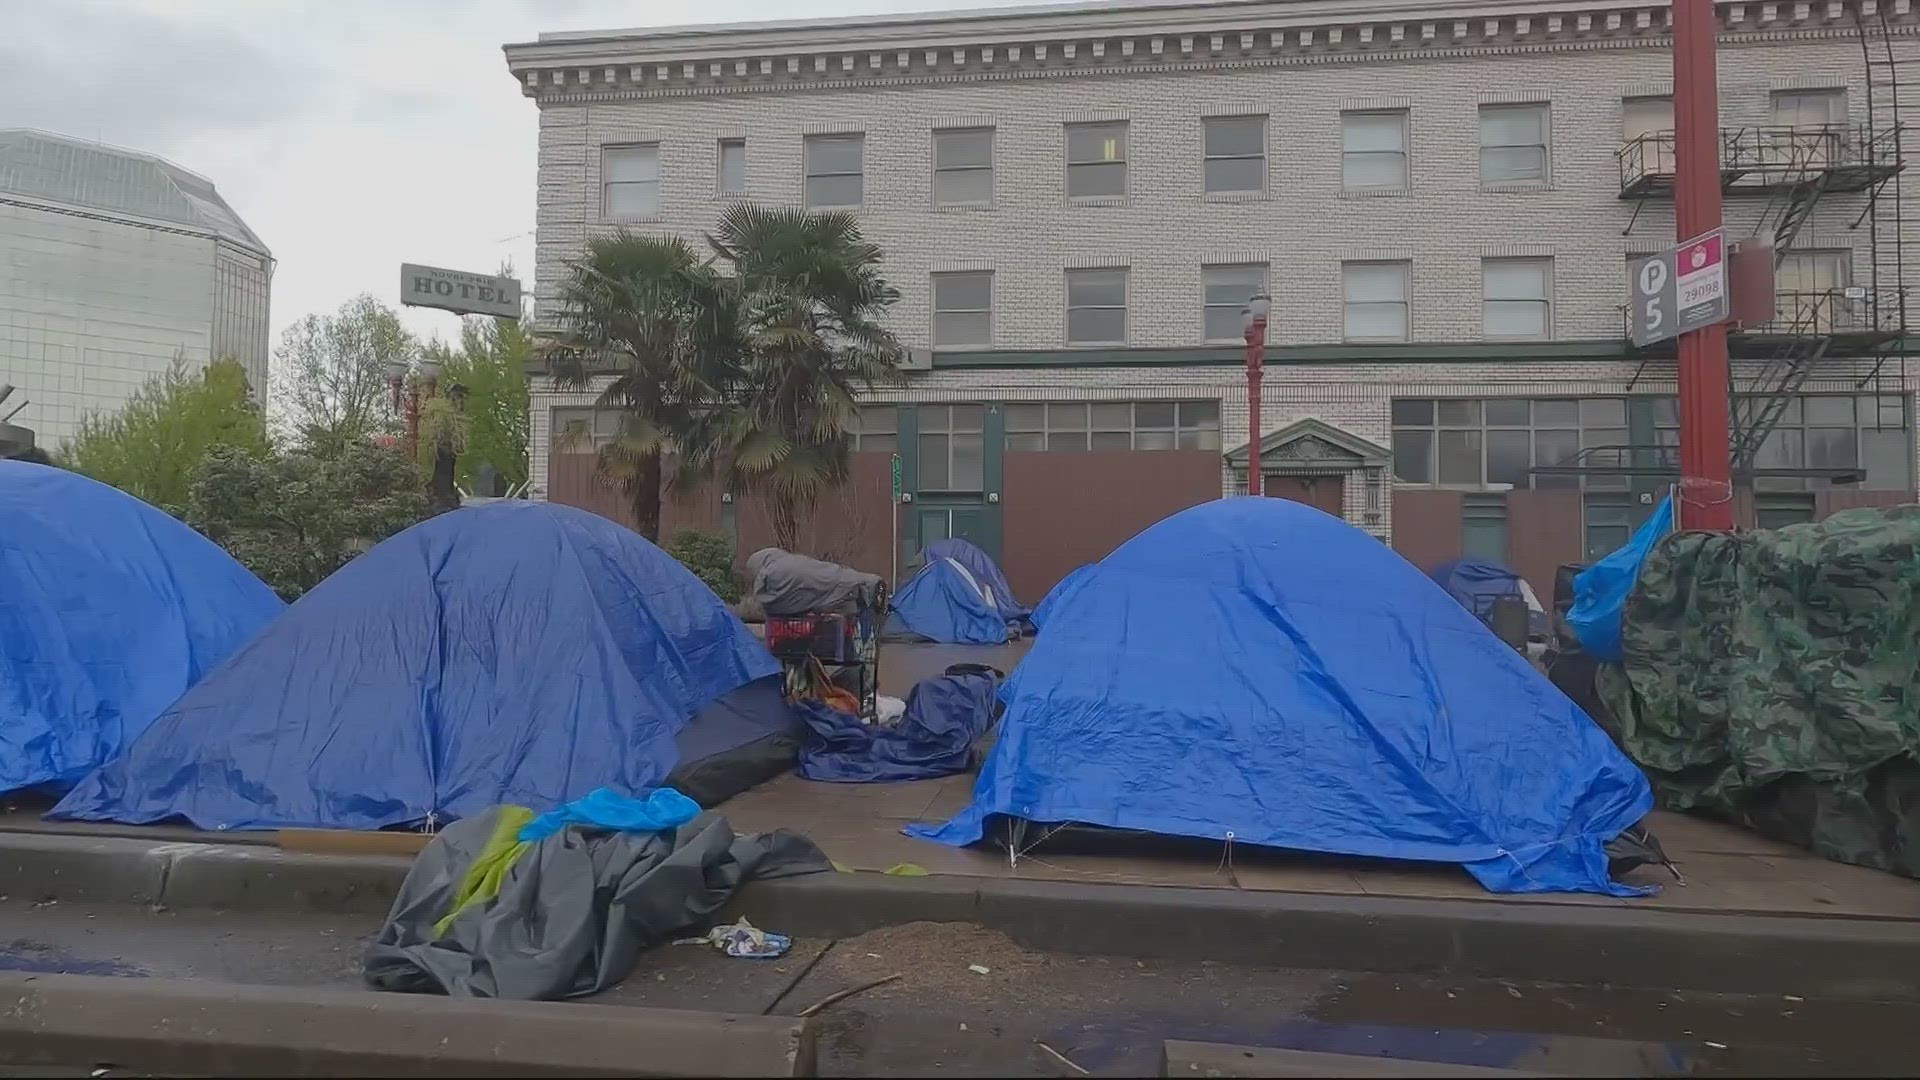 If approved, the agreement will require Portland to remove at least 500 sidewalk camps per year and put at least $3 million annually toward removals.